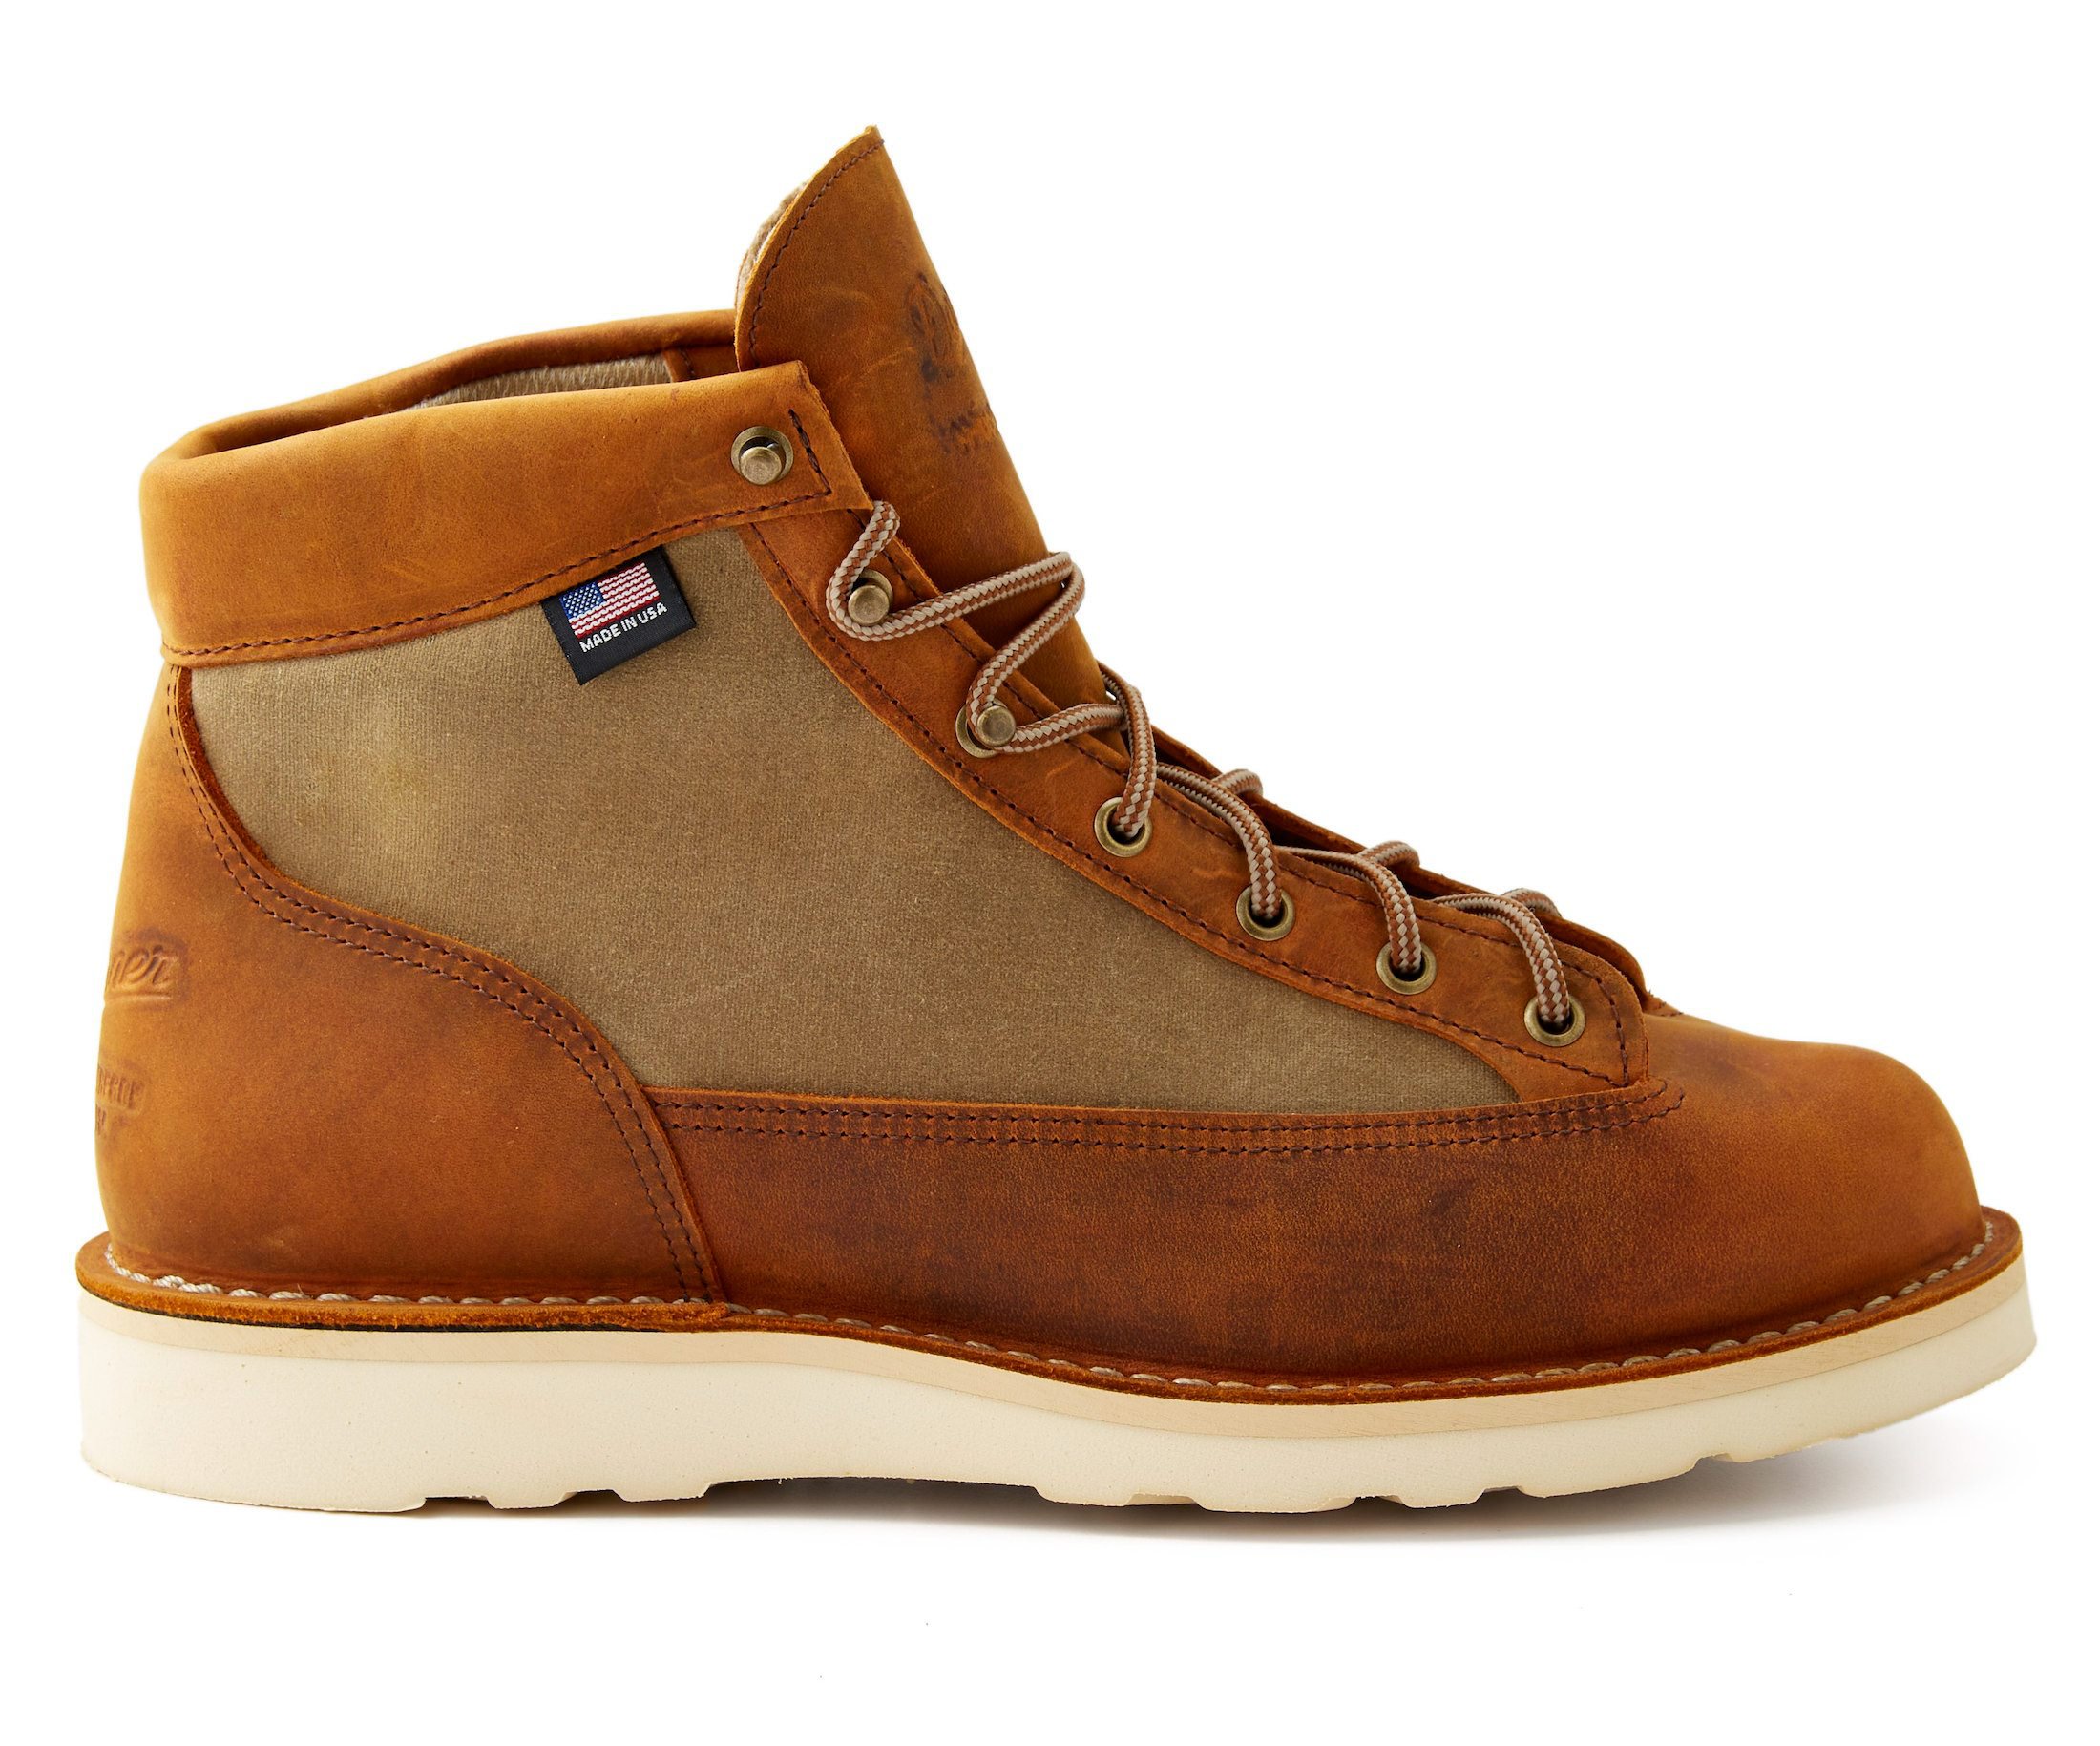 Huckberry x Danner Waxed Canvas Danner Light Boots – Made In The USA